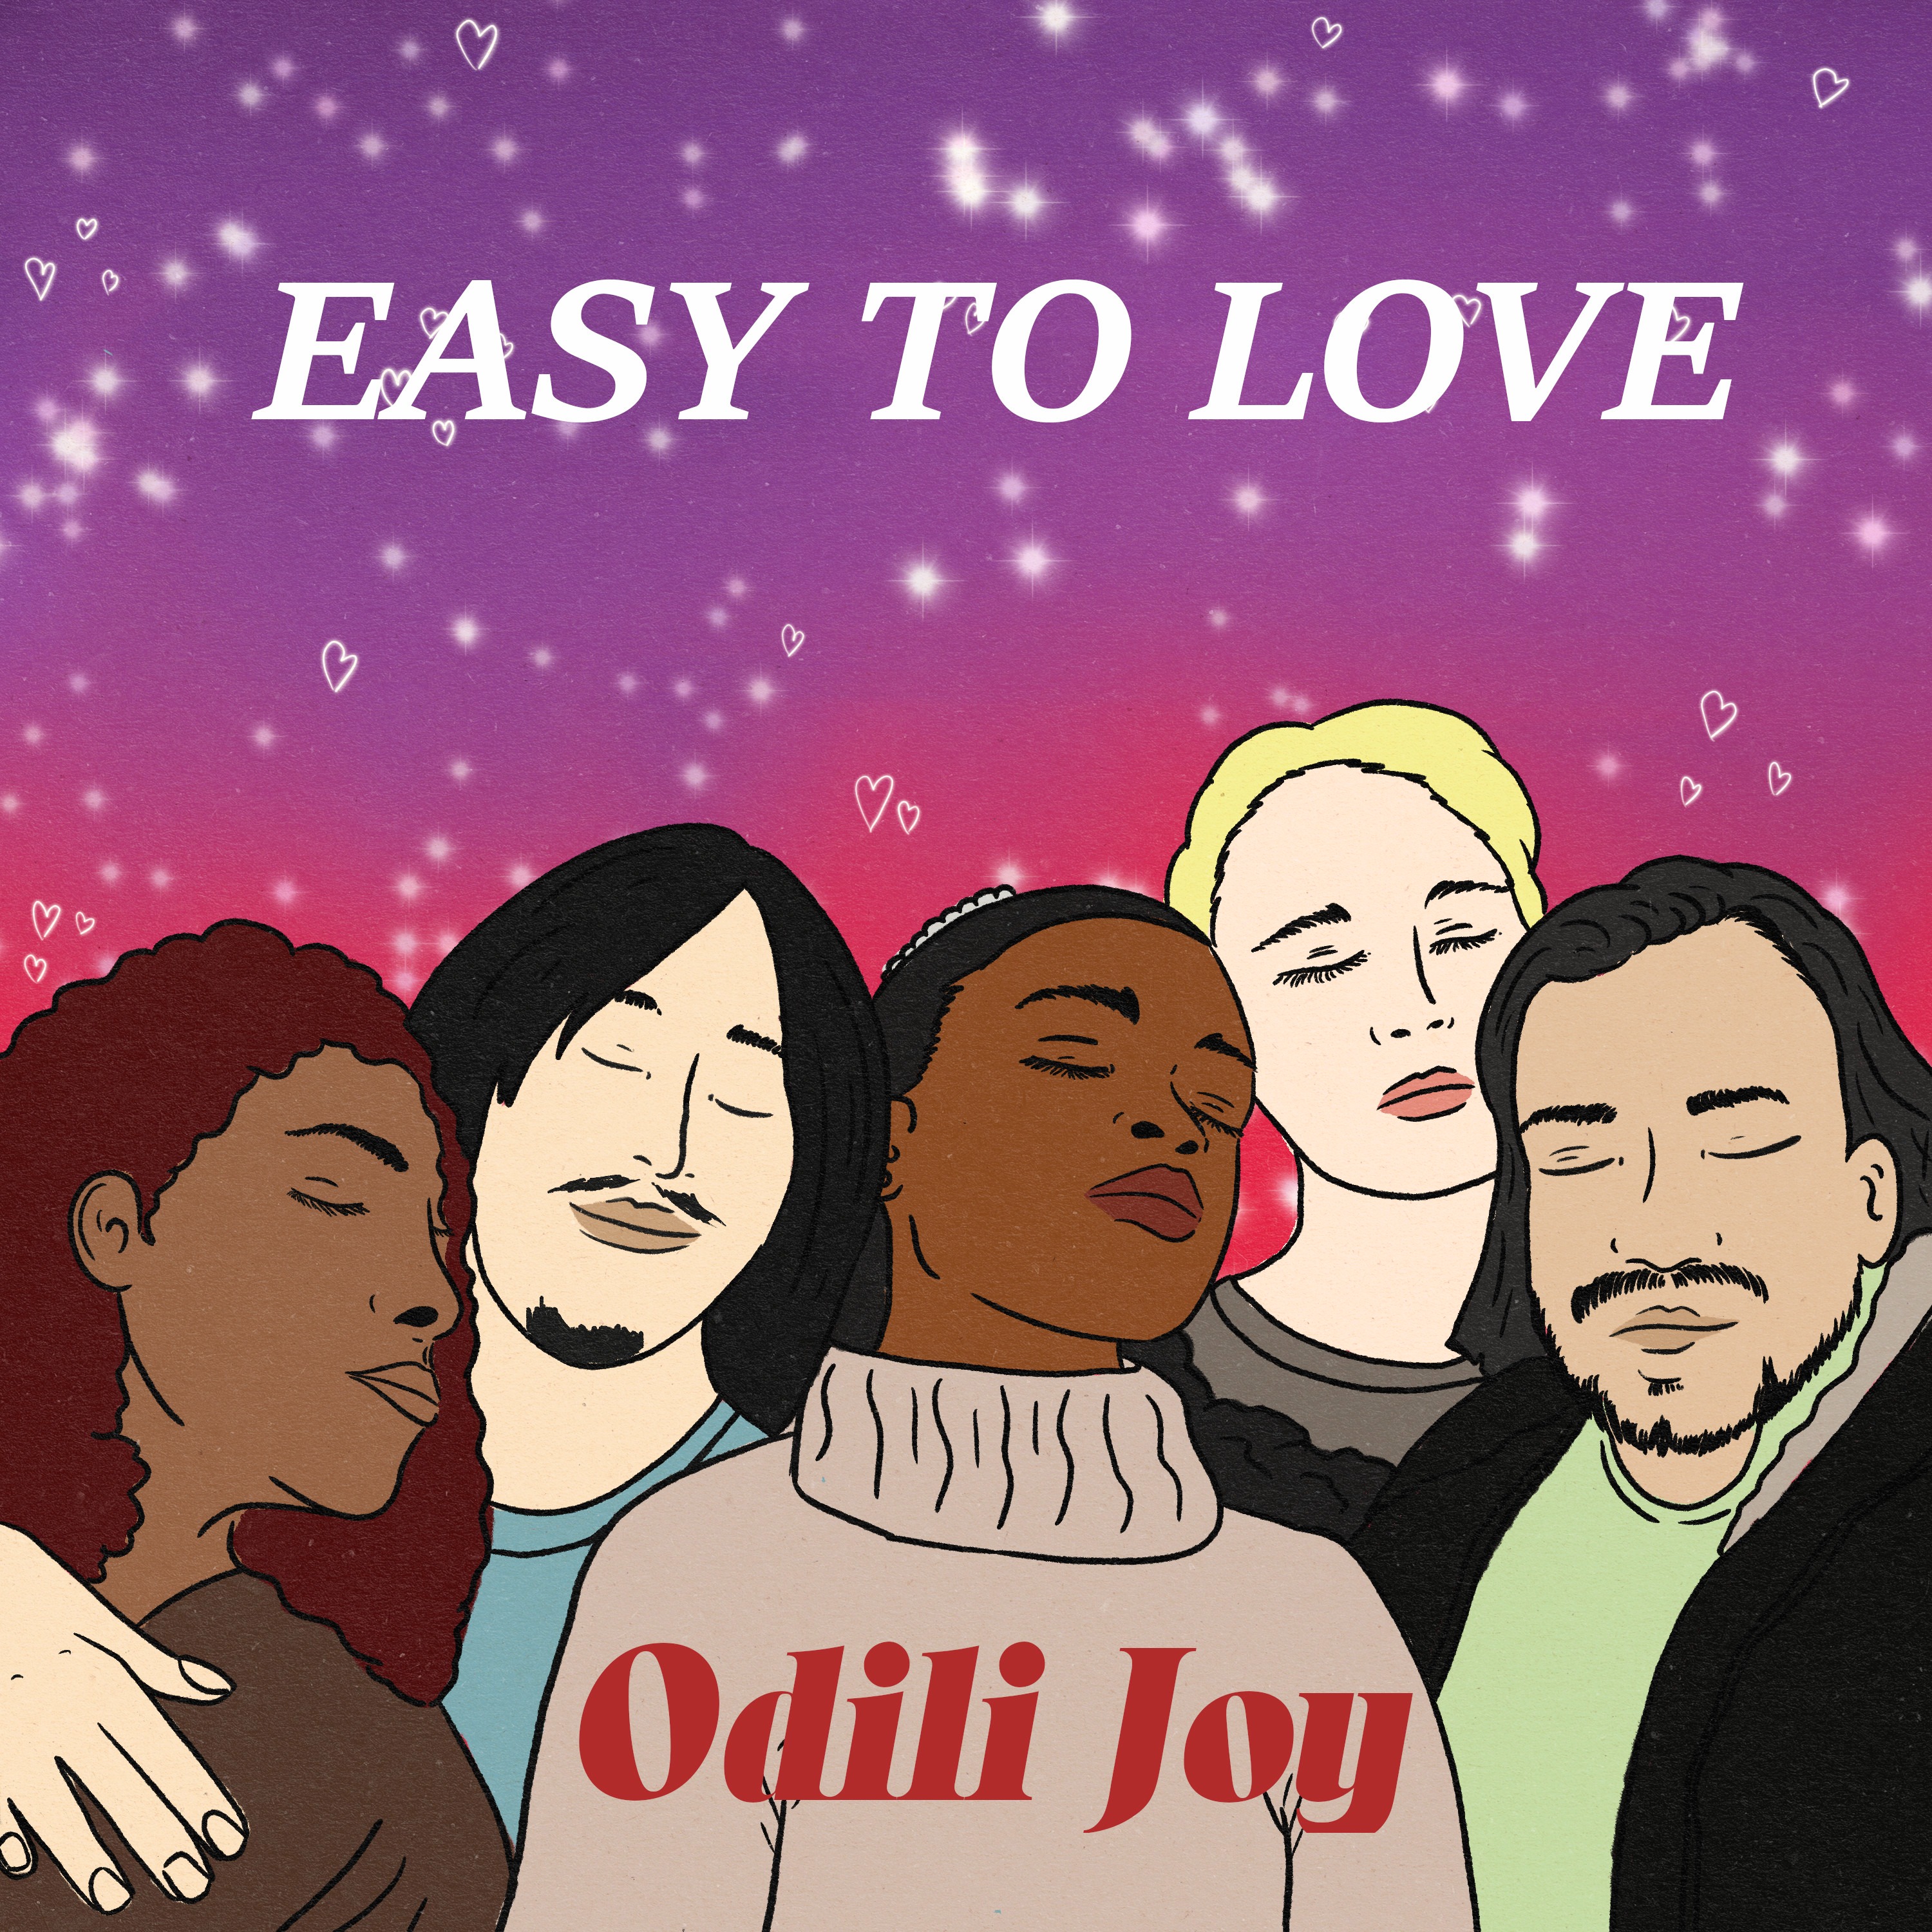 Pop Music Finds a Powerful Voice in Gifted Nigerian Artist: Odili Joy Wins Hearts with New Track "Easy to Love"